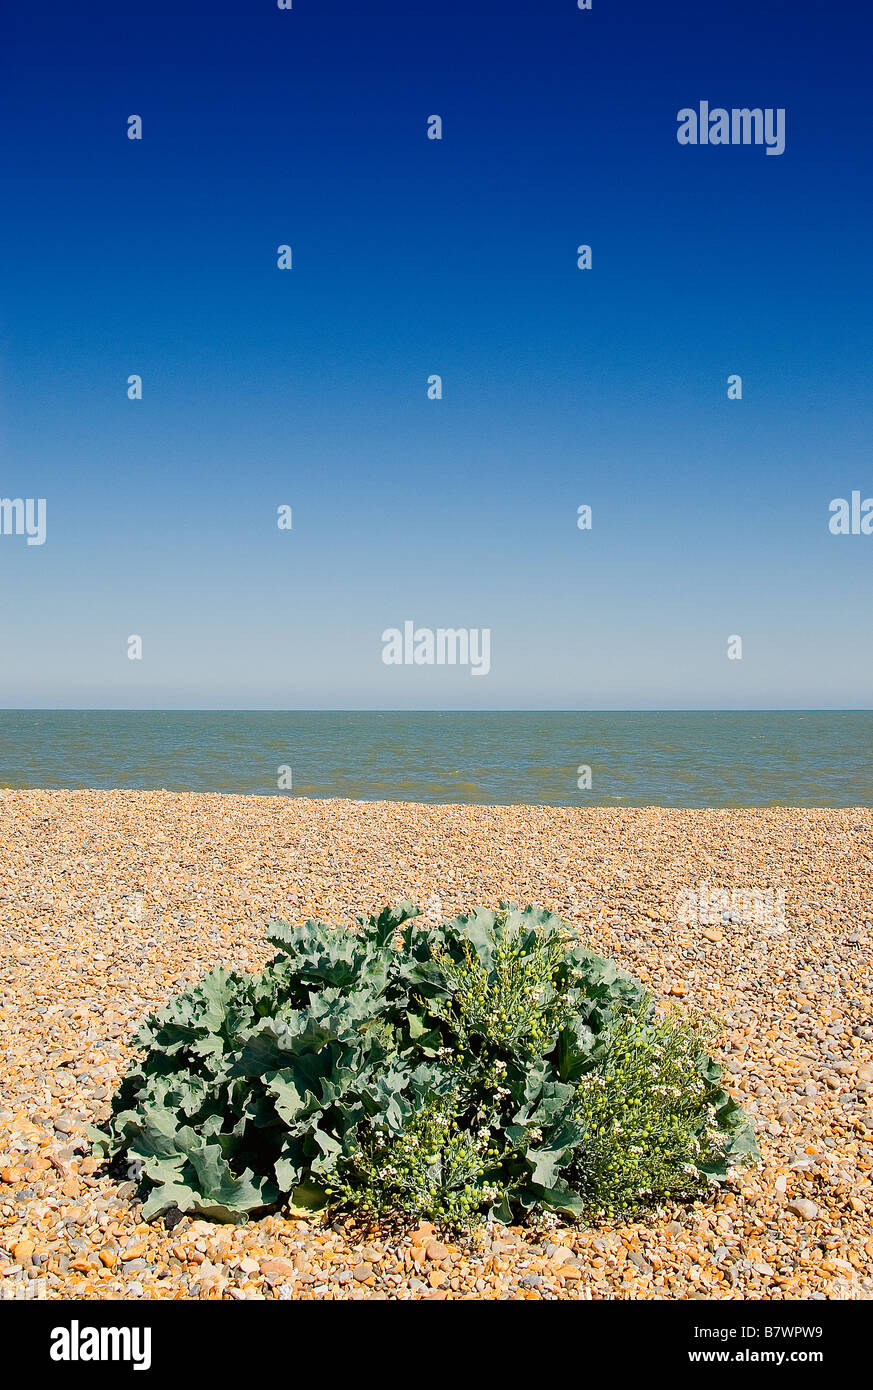 Sea kale on the pebble beach at Aldeburgh, Suffolk, England, with sea and blue sky in background, sunny day Stock Photo